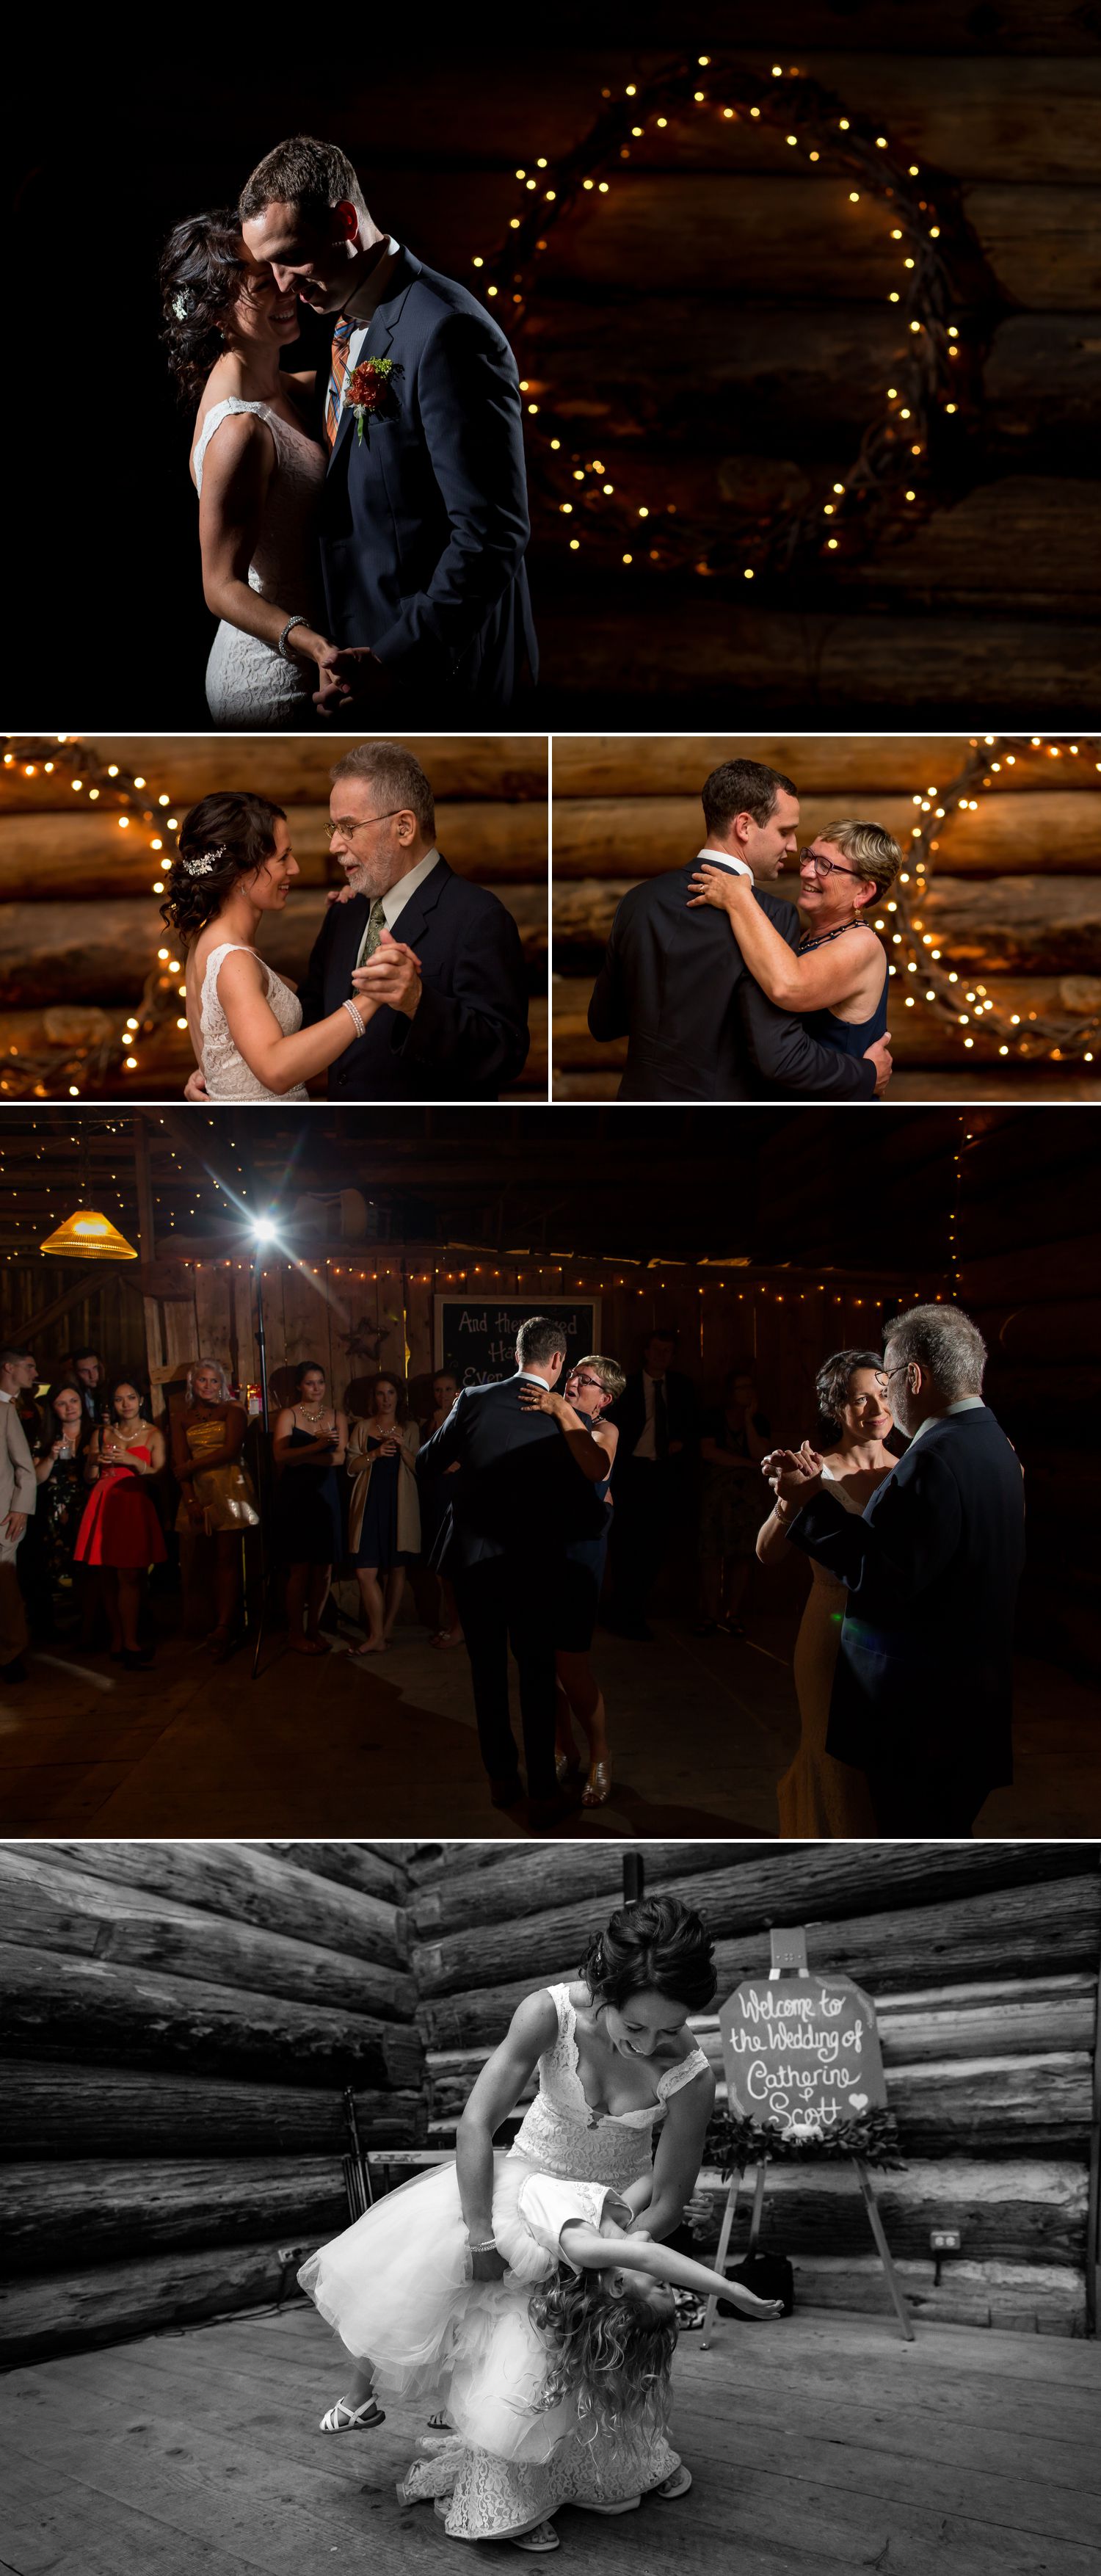 The couple and their parents during their first dances at their wedding reception at The Herb Garden